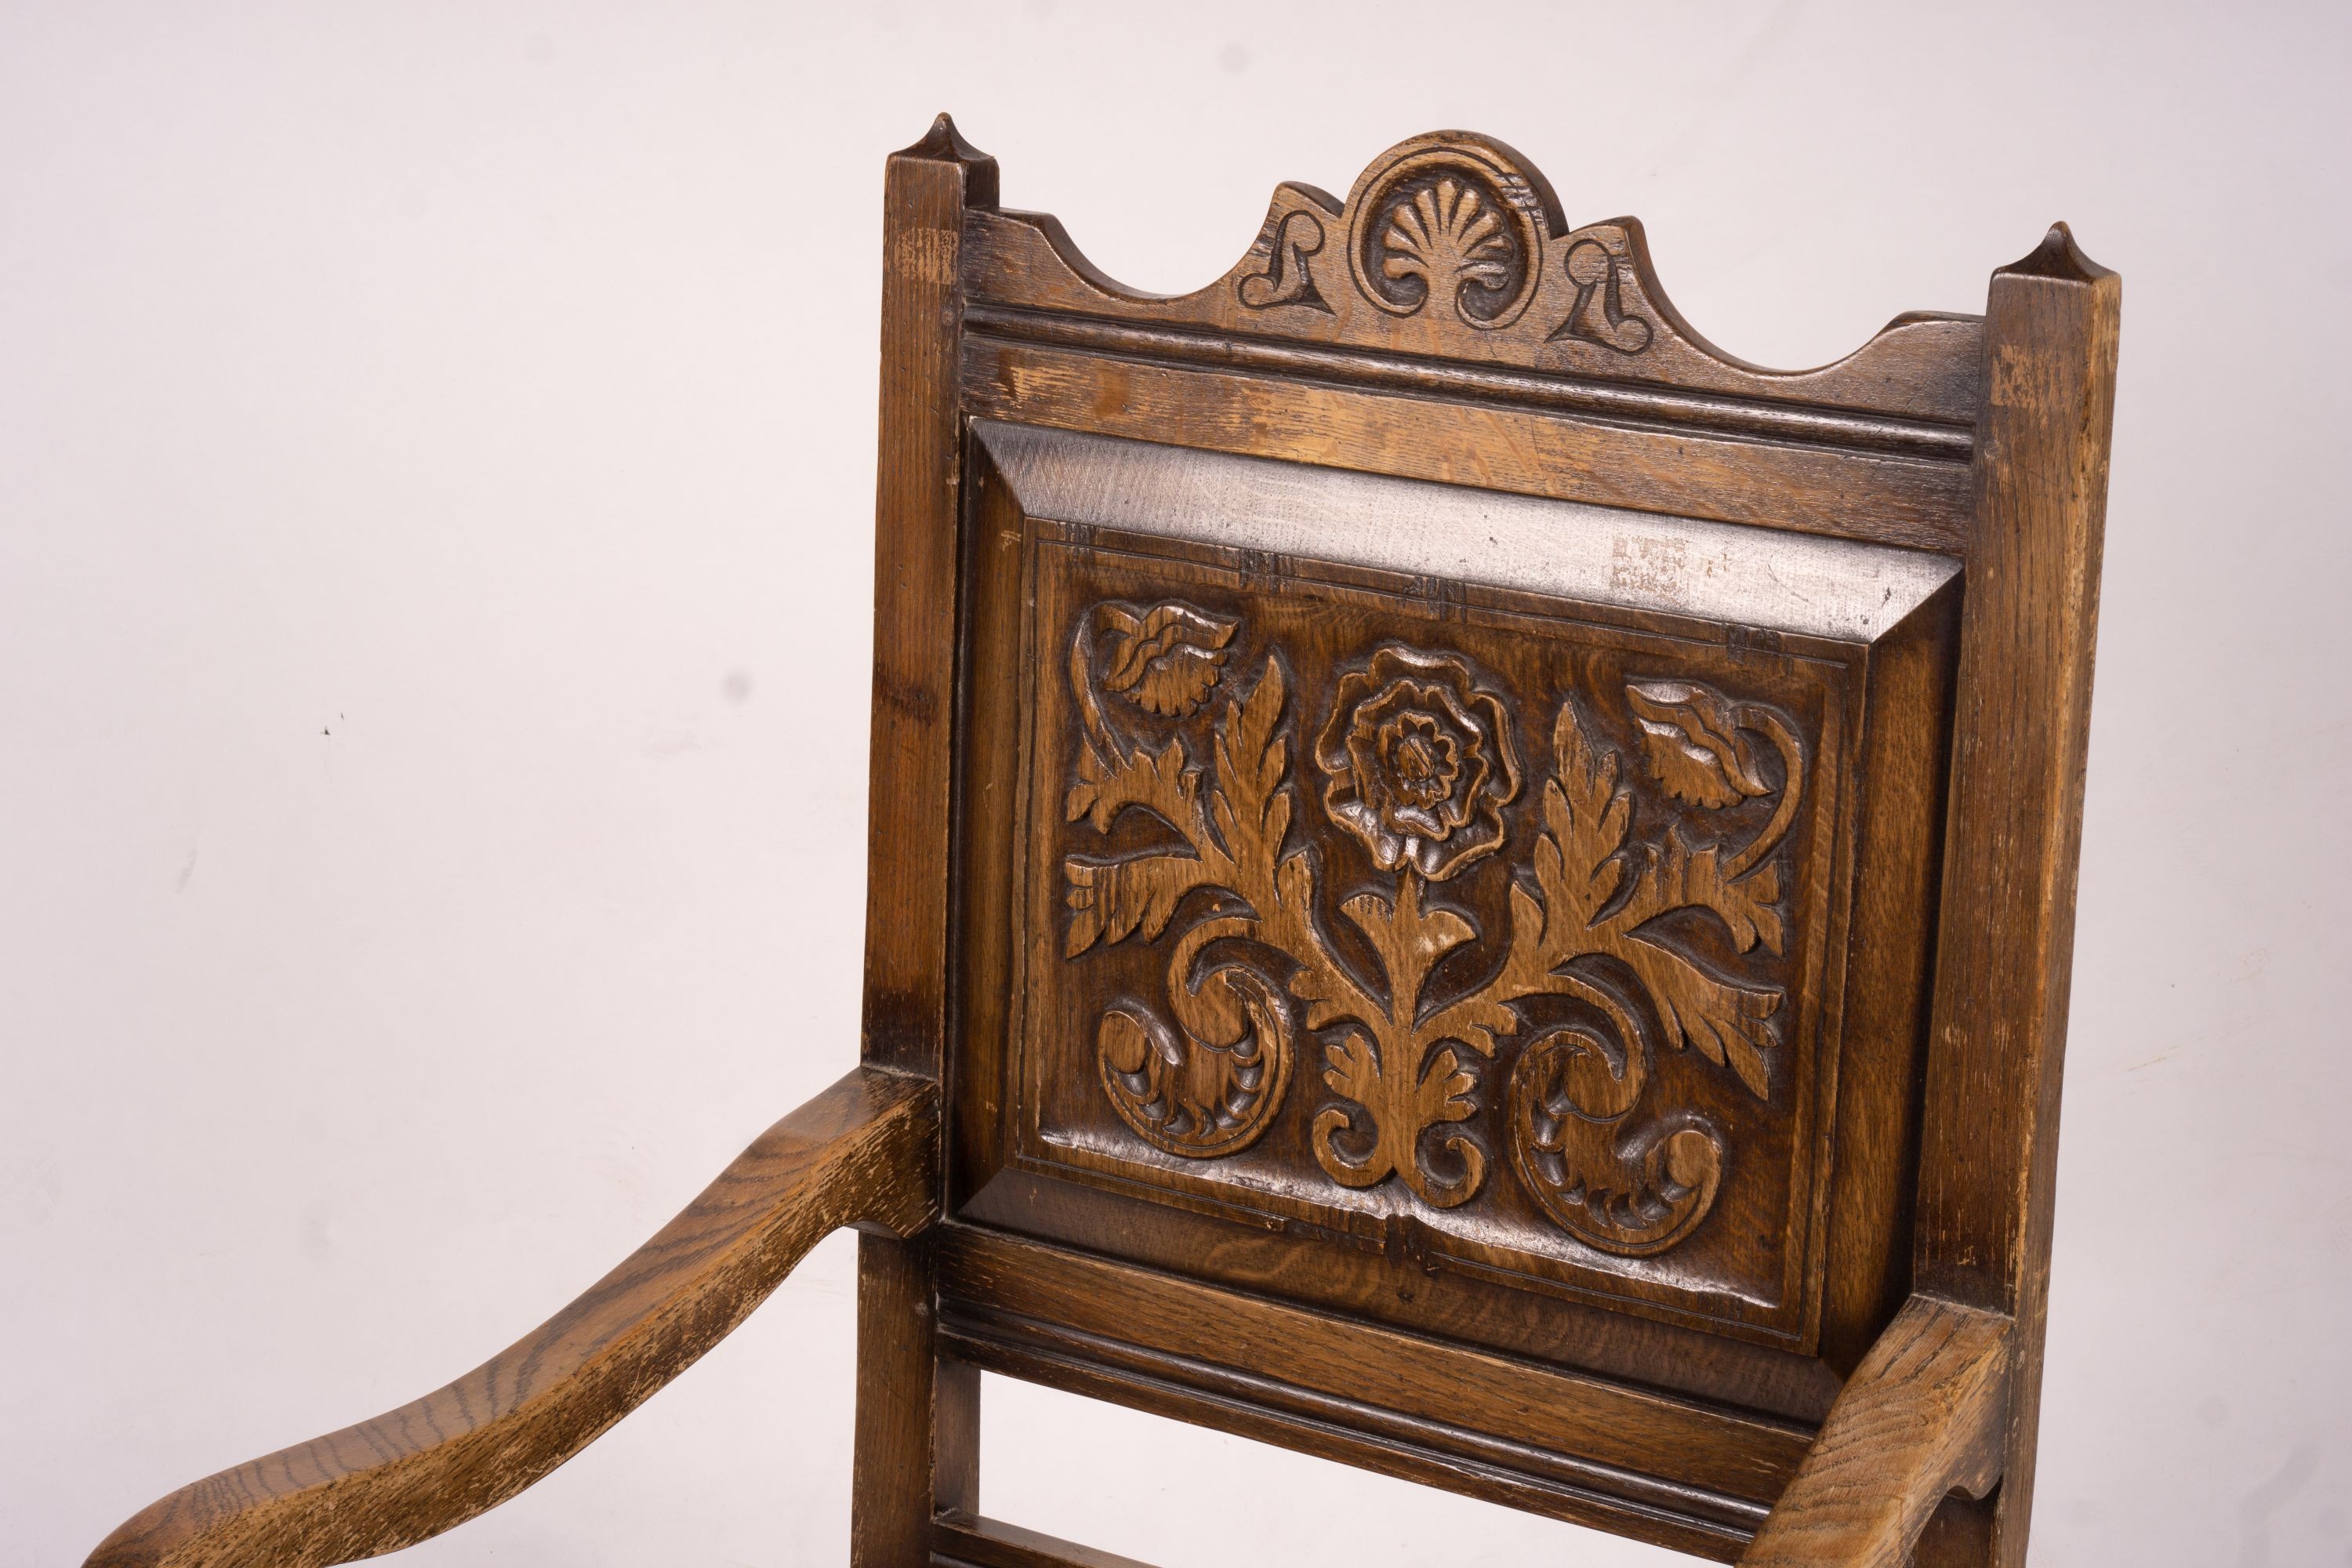 An early 20th century carved oak wainscot chair